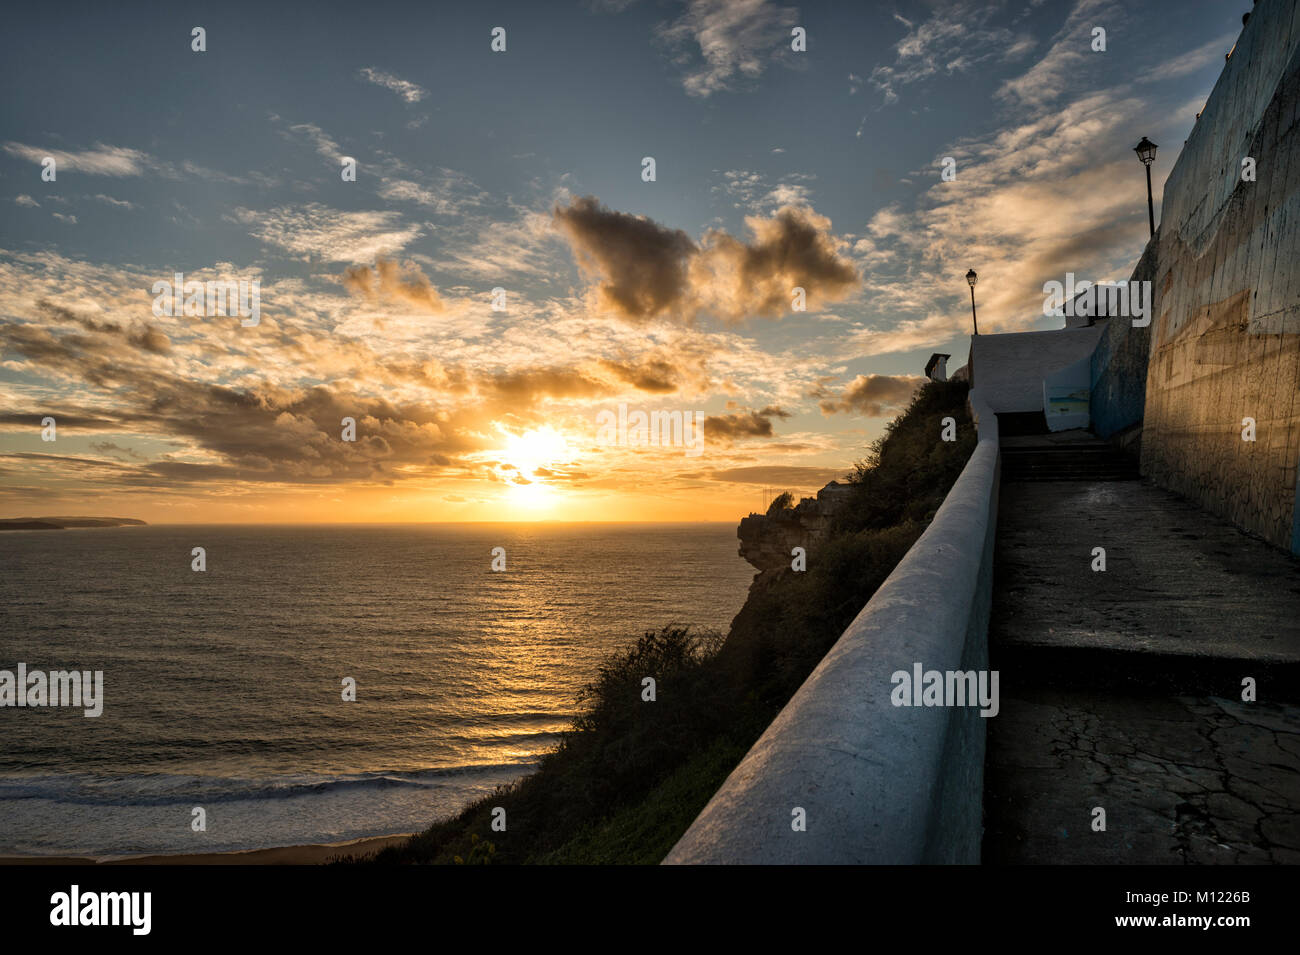 sunset at the Miradouro do suberco, Sitio at Nazare, Portugal. Stock Photo